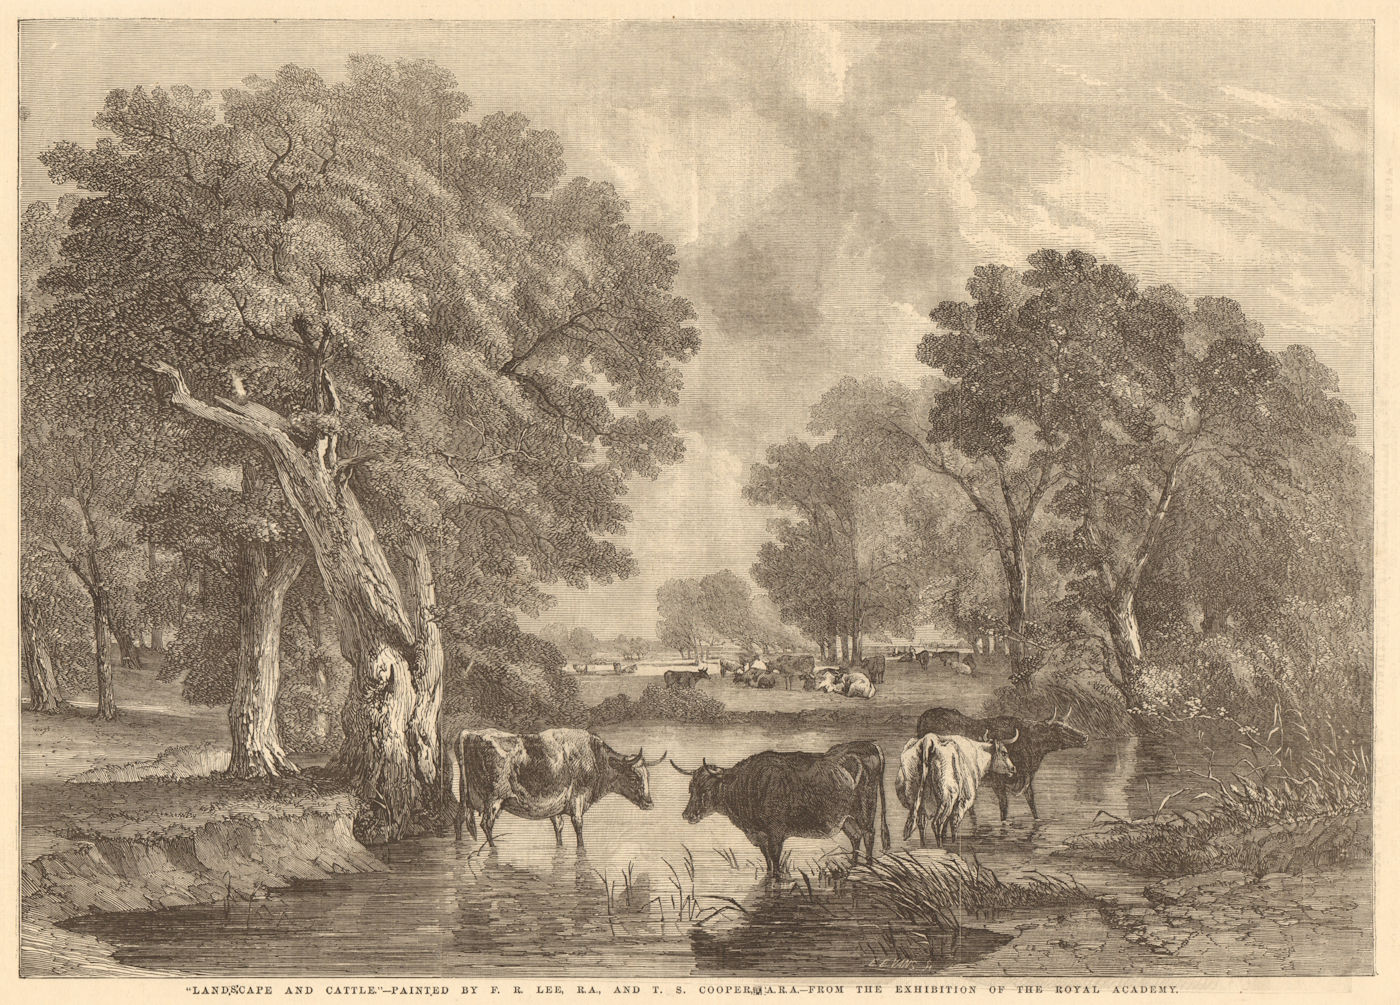 Landscape & cattle - by F. R. Lee, & T. S. Cooper, A. R. A. Fine Arts 1856